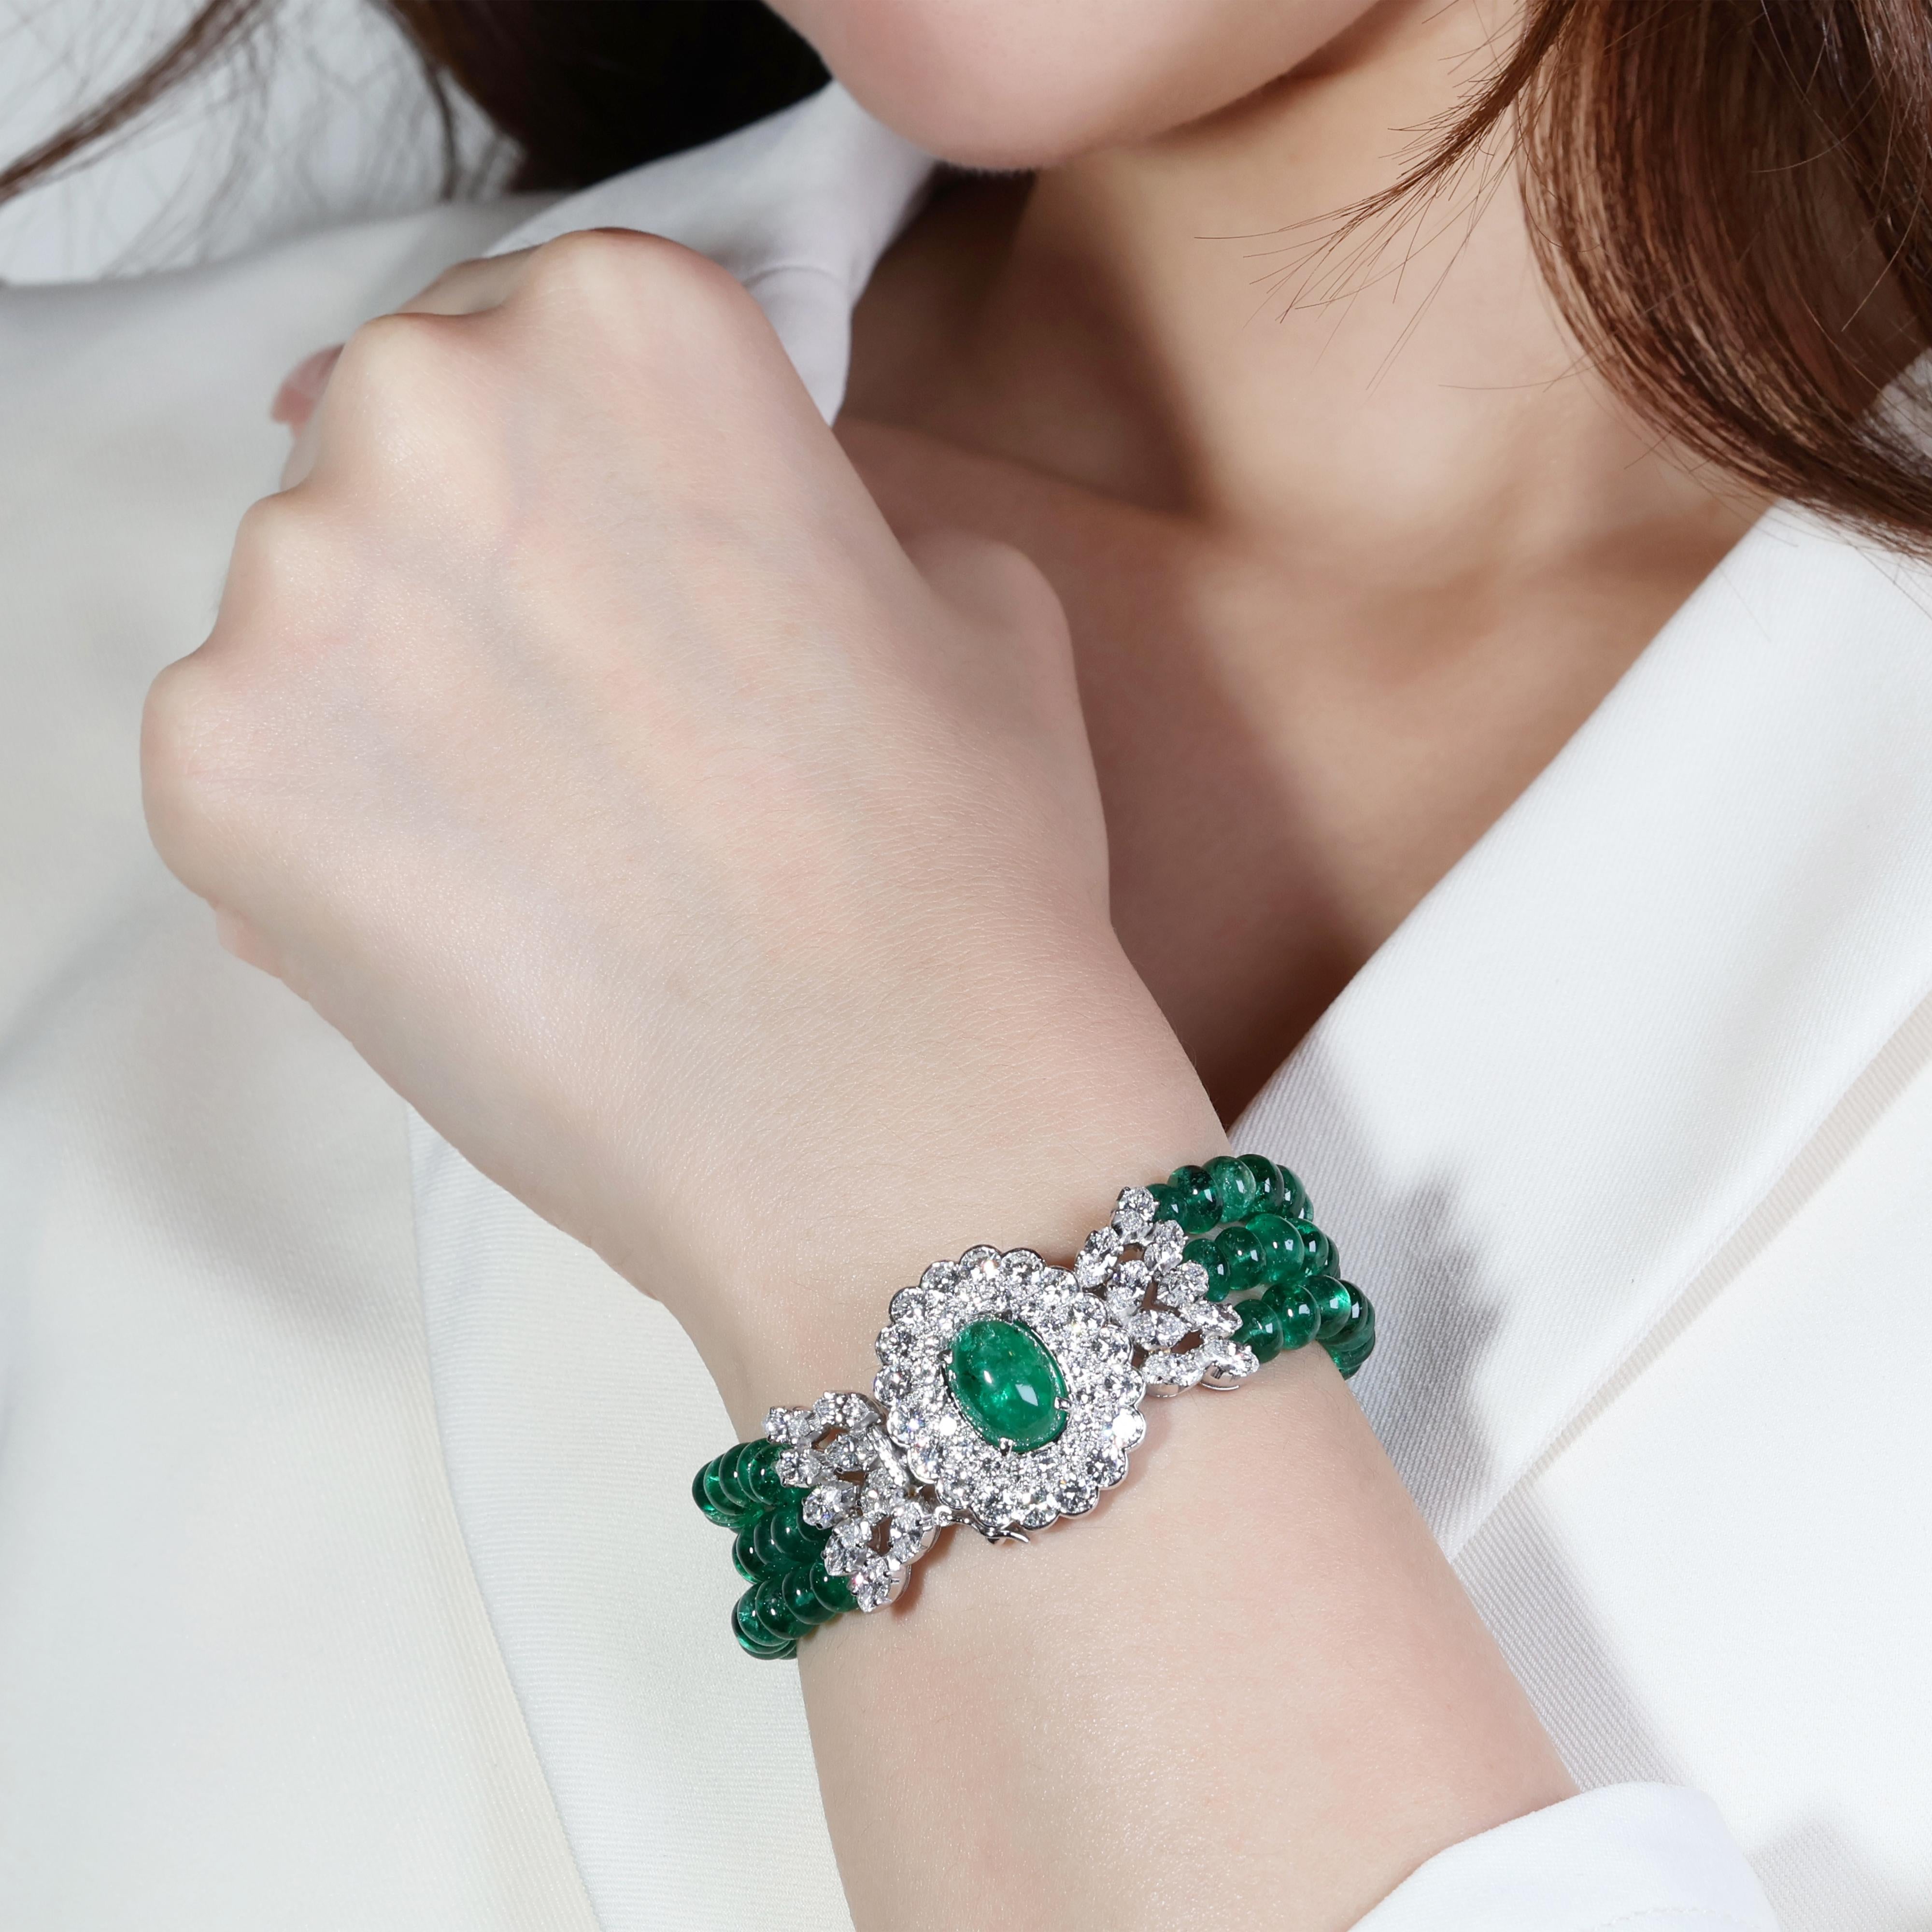 This exquisite bracelet showcases a captivating display of emeralds, beryl, and diamonds, meticulously set in luxurious 18K white gold. The centerpiece features a mesmerizing cabochon emerald boasting a remarkable 4.76 carats and an intense green